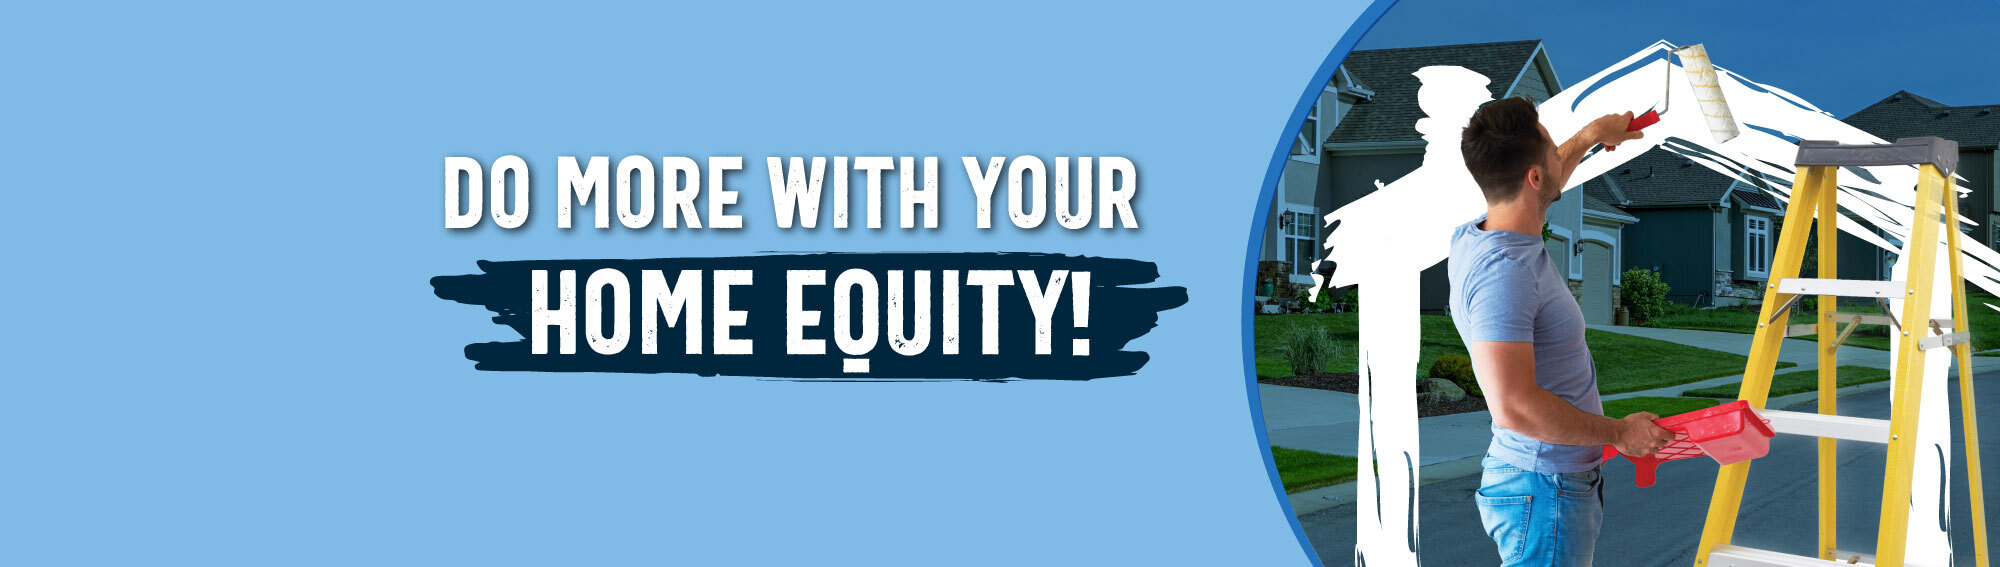 Do More With Your Home Equity image header